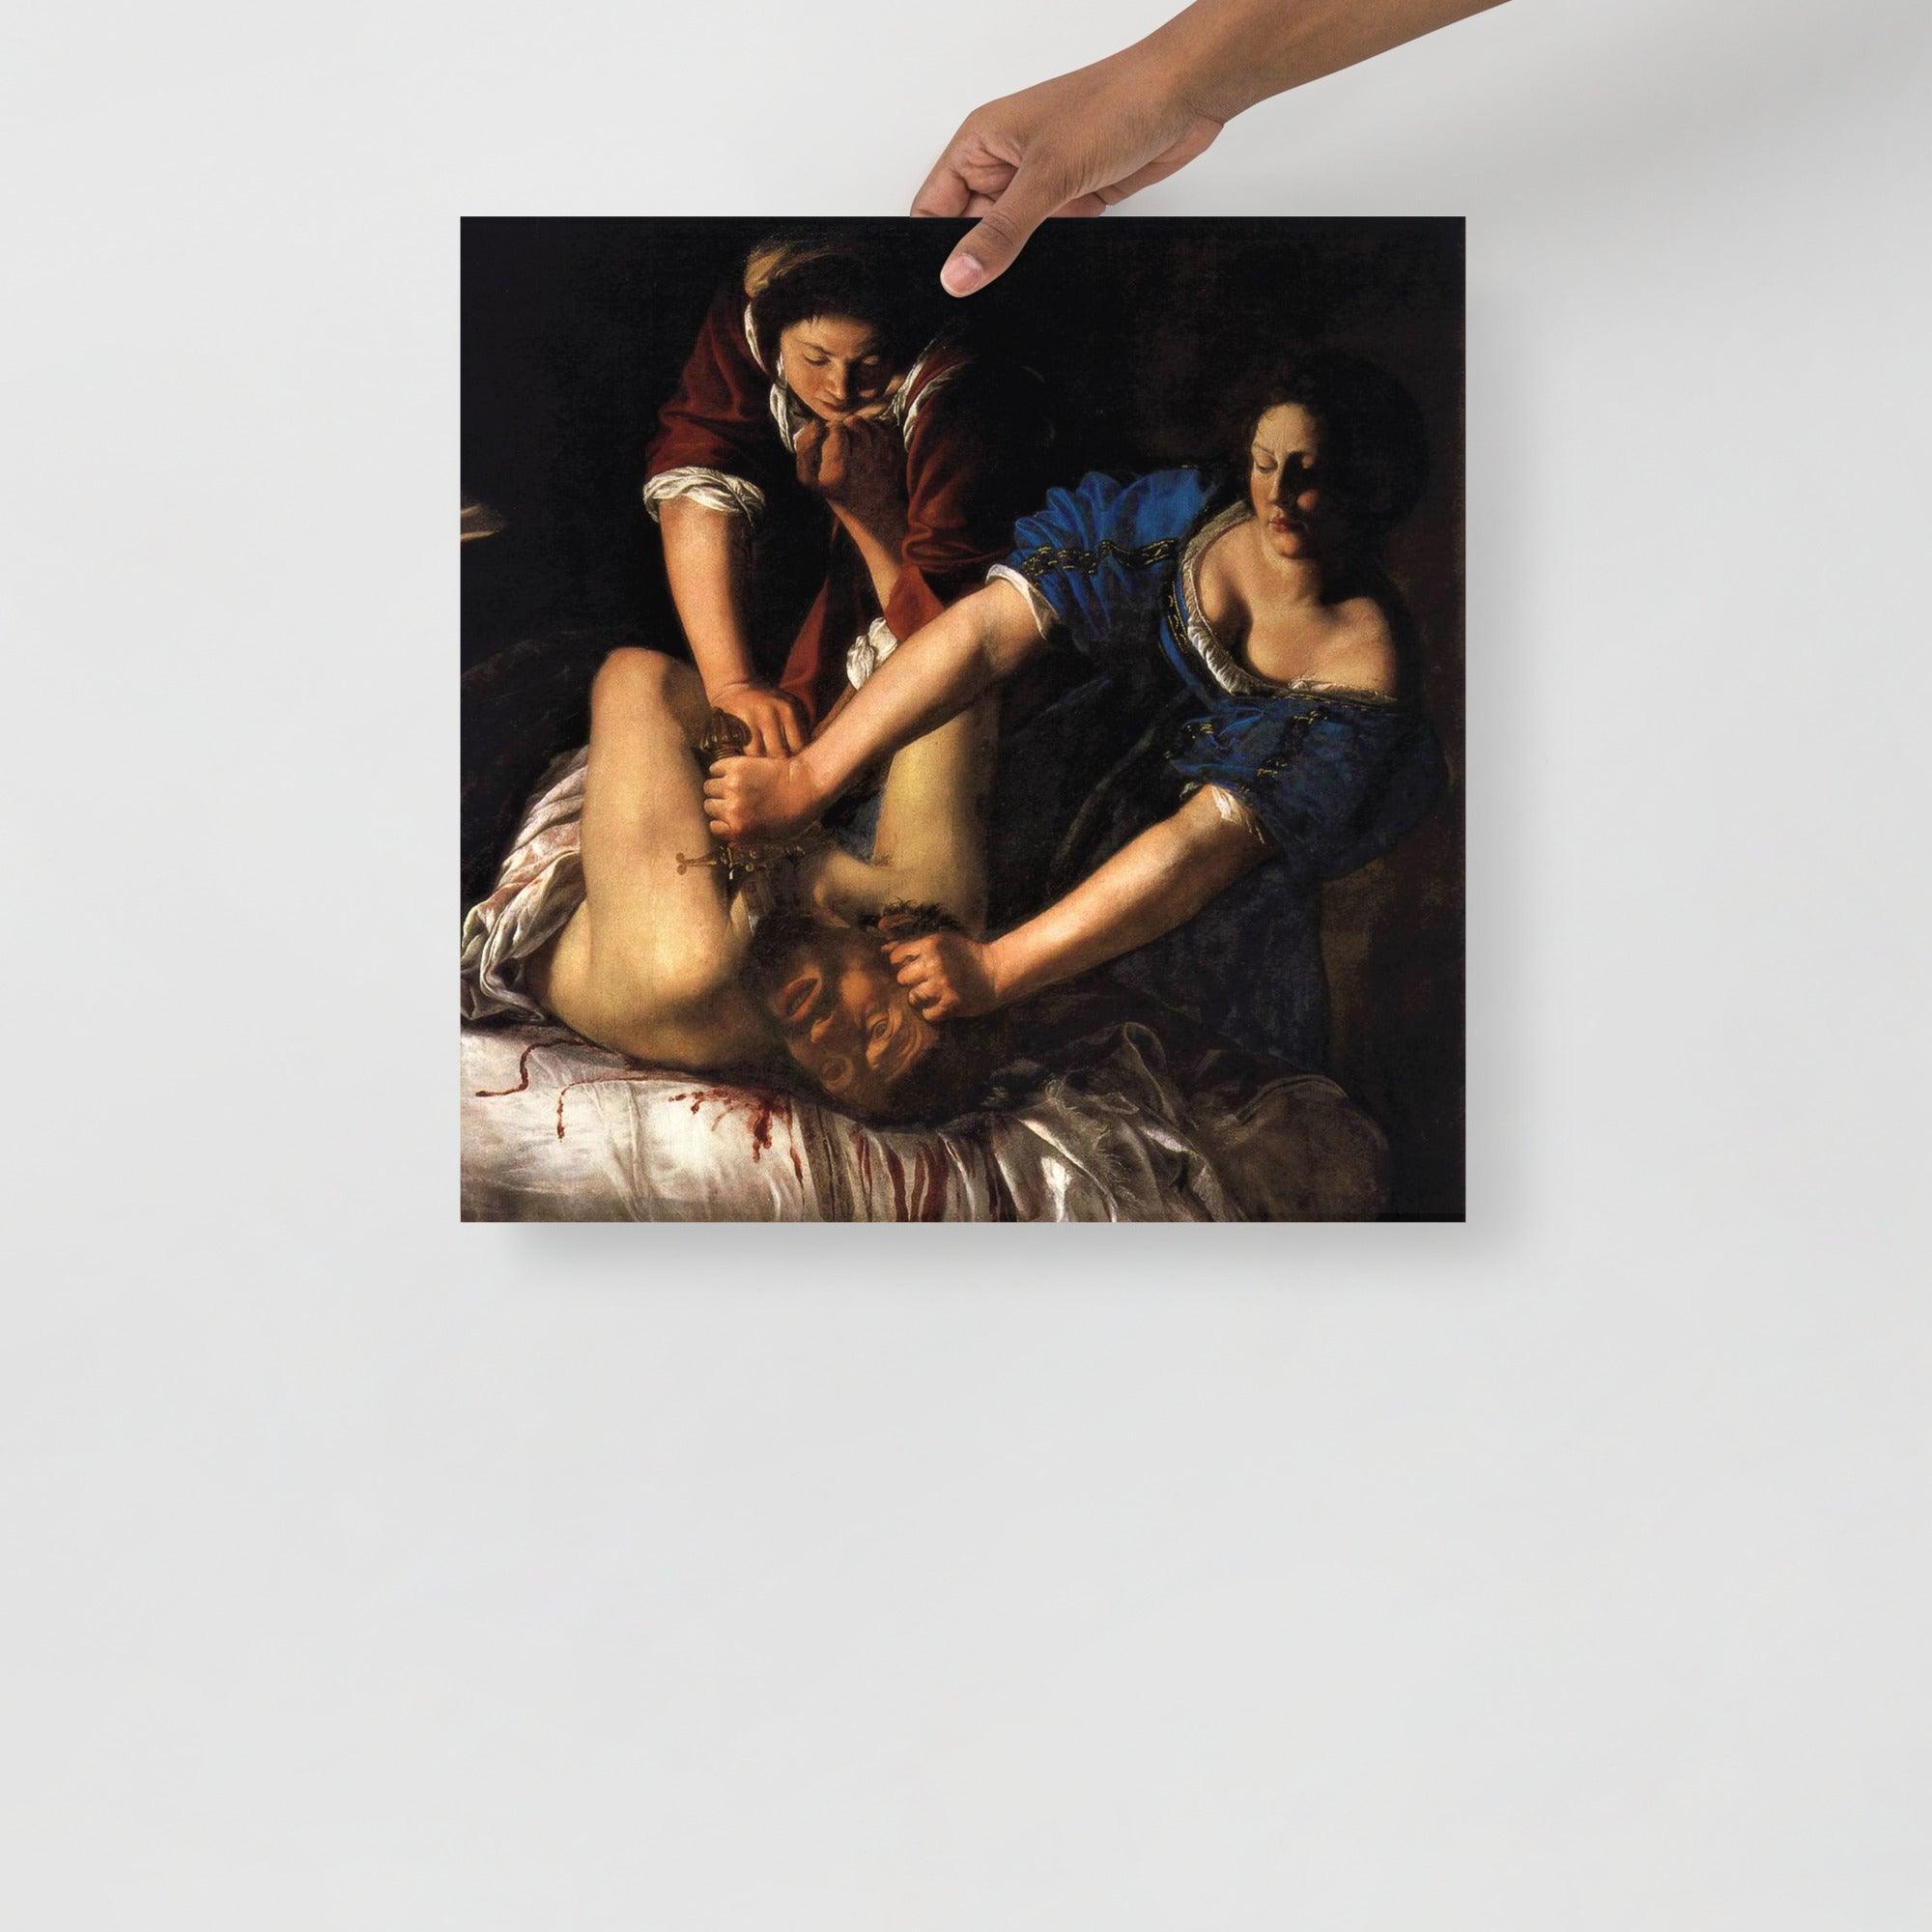 A Judith beheading Holofernes by Artemisia Gentileschi poster on a plain backdrop in size 18x18”.